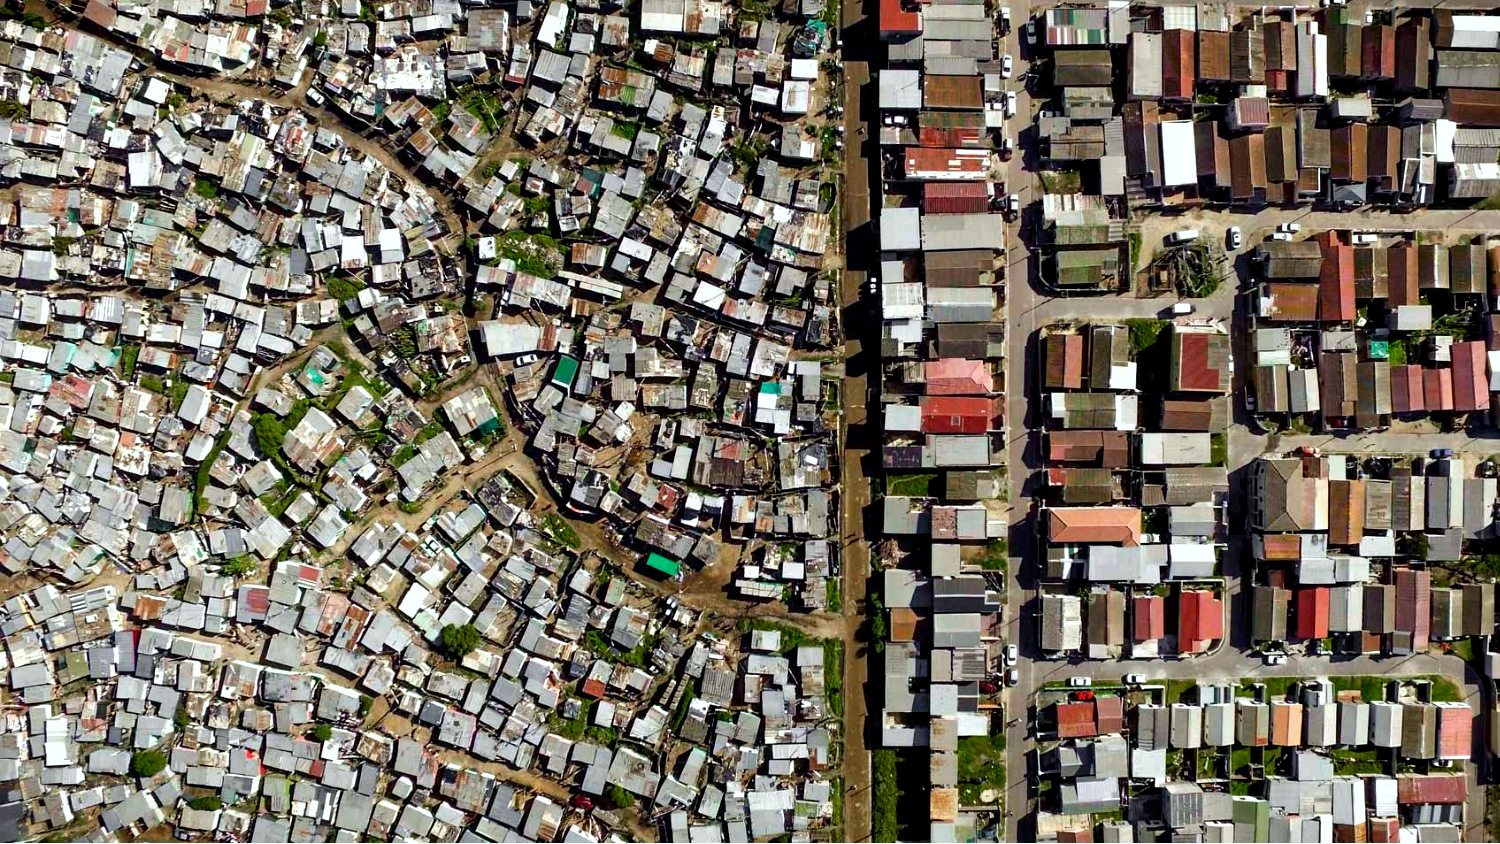 This drone photo shows the stunning divide between rich in poor in the Vukuzenzele district of Cape Town, South Africa. (Photo: Johnny Miller/AfrcanDrone.org)